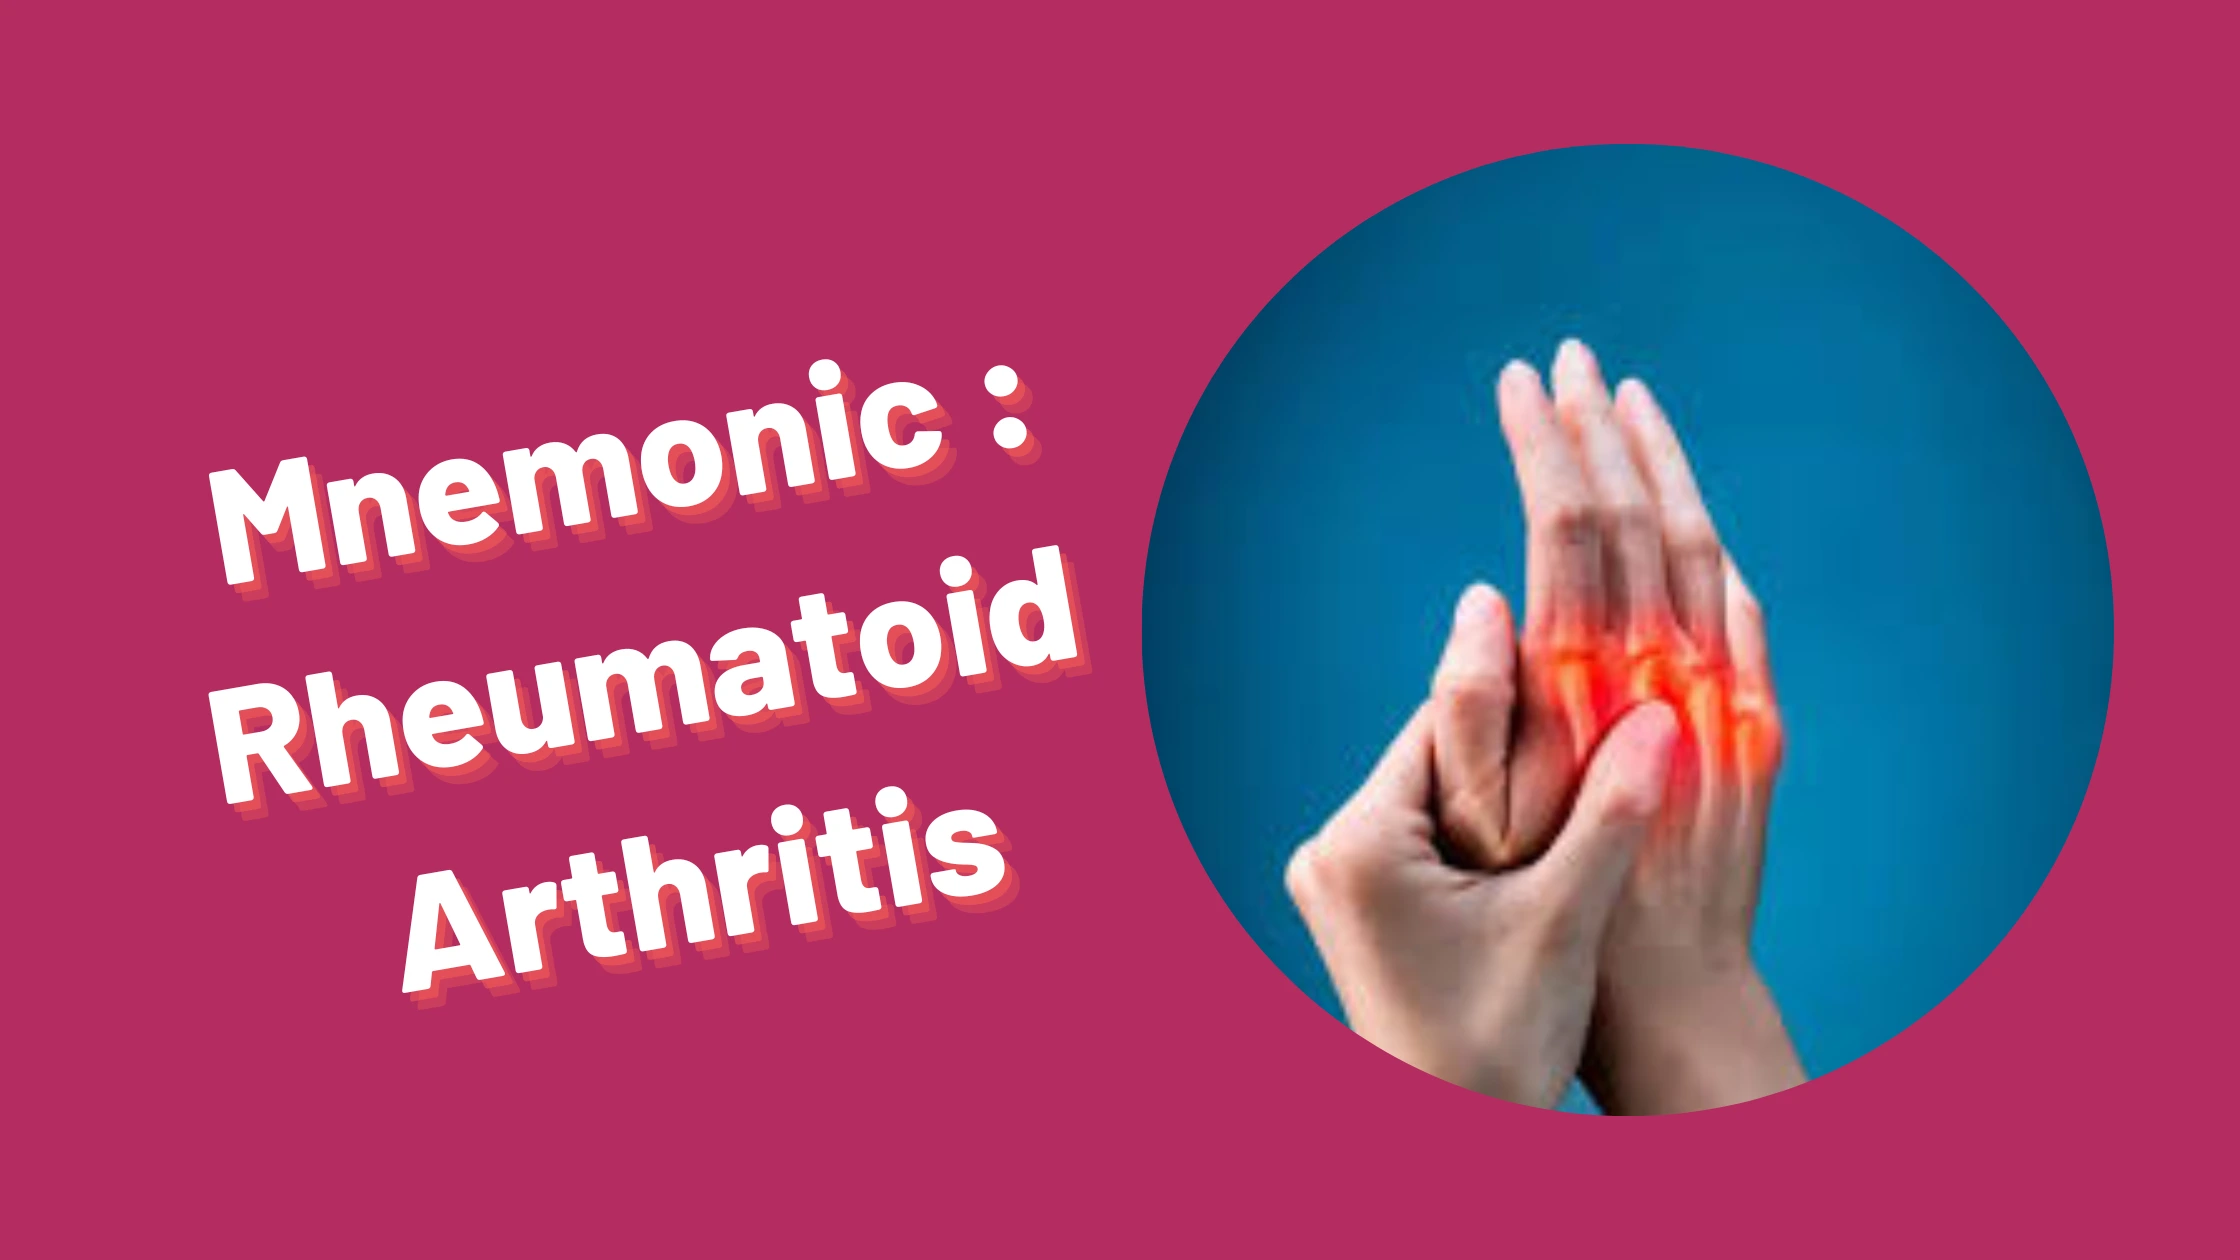 You are currently viewing [Very Cool] Mnemonic : Rheumatoid Arthritis